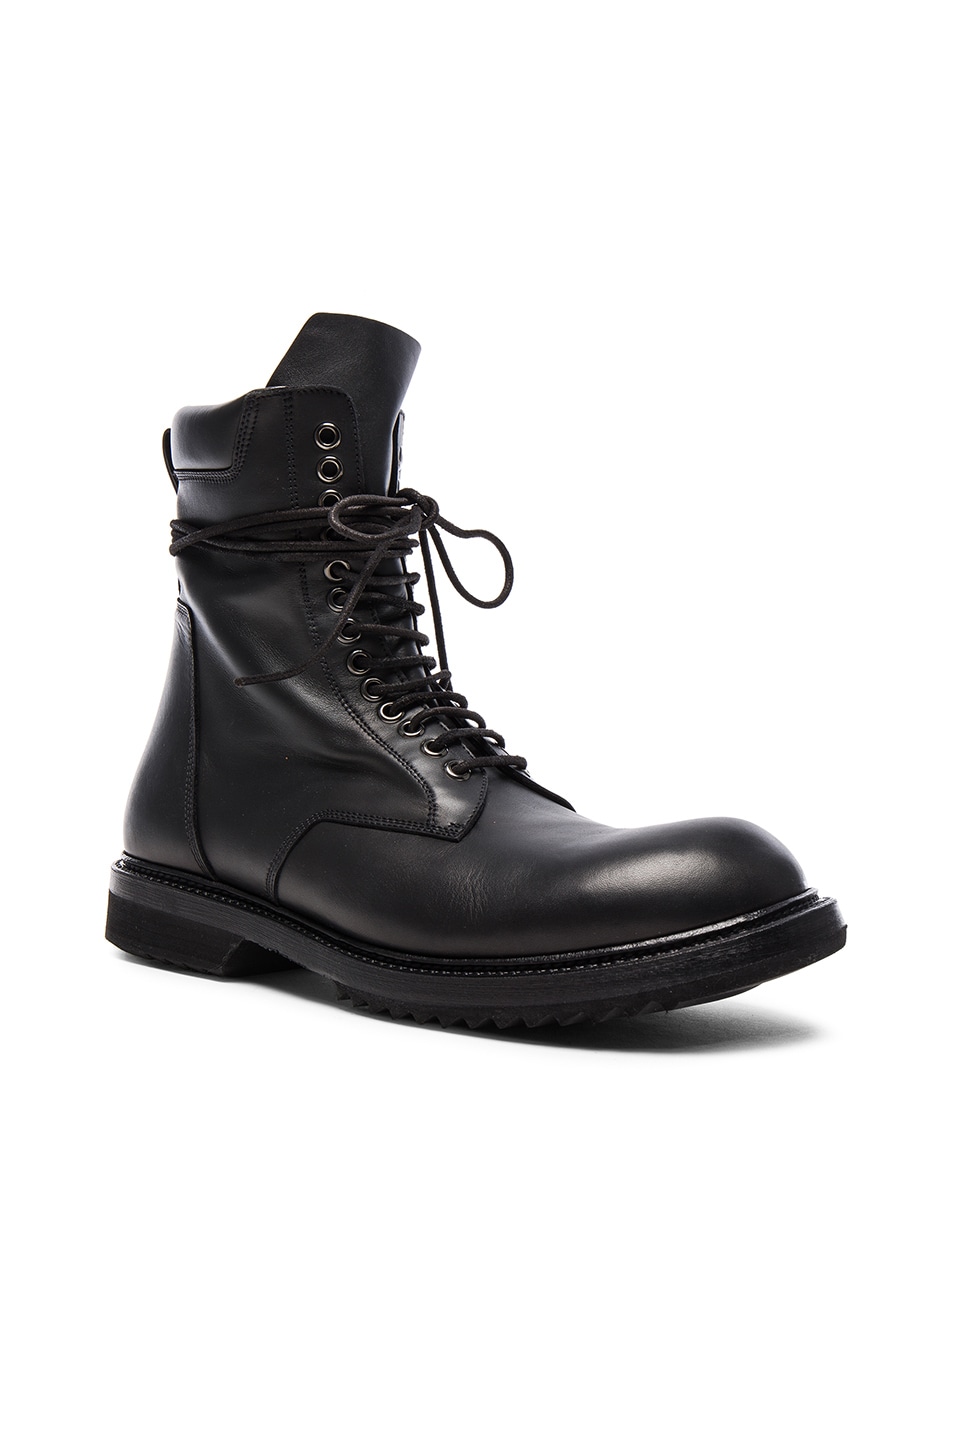 Rick Owens Low Leather Army Boots in Black | FWRD